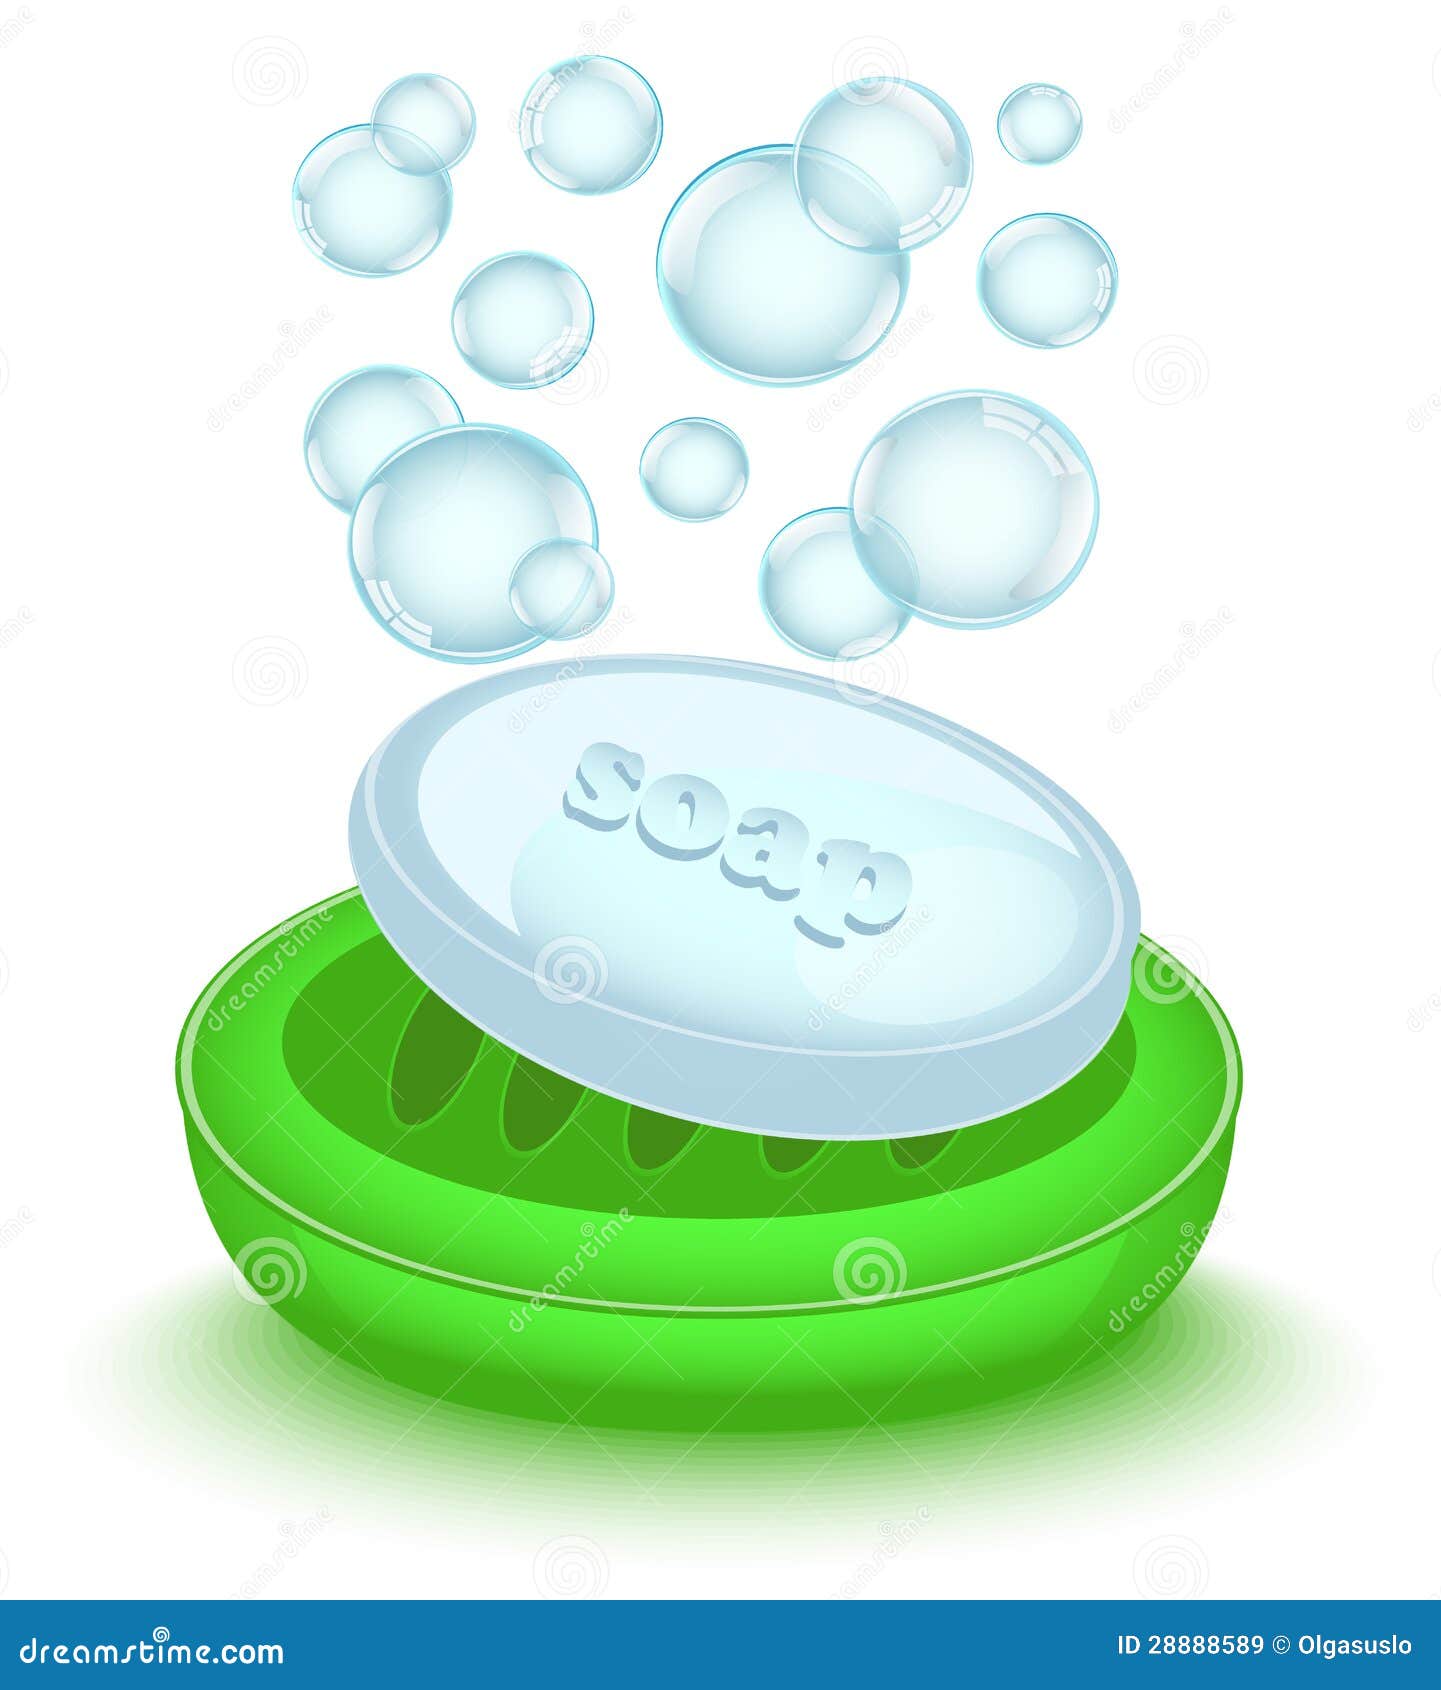 Bar Of Soap With Bubbles Royalty Free Stock Images - Image: 28888589